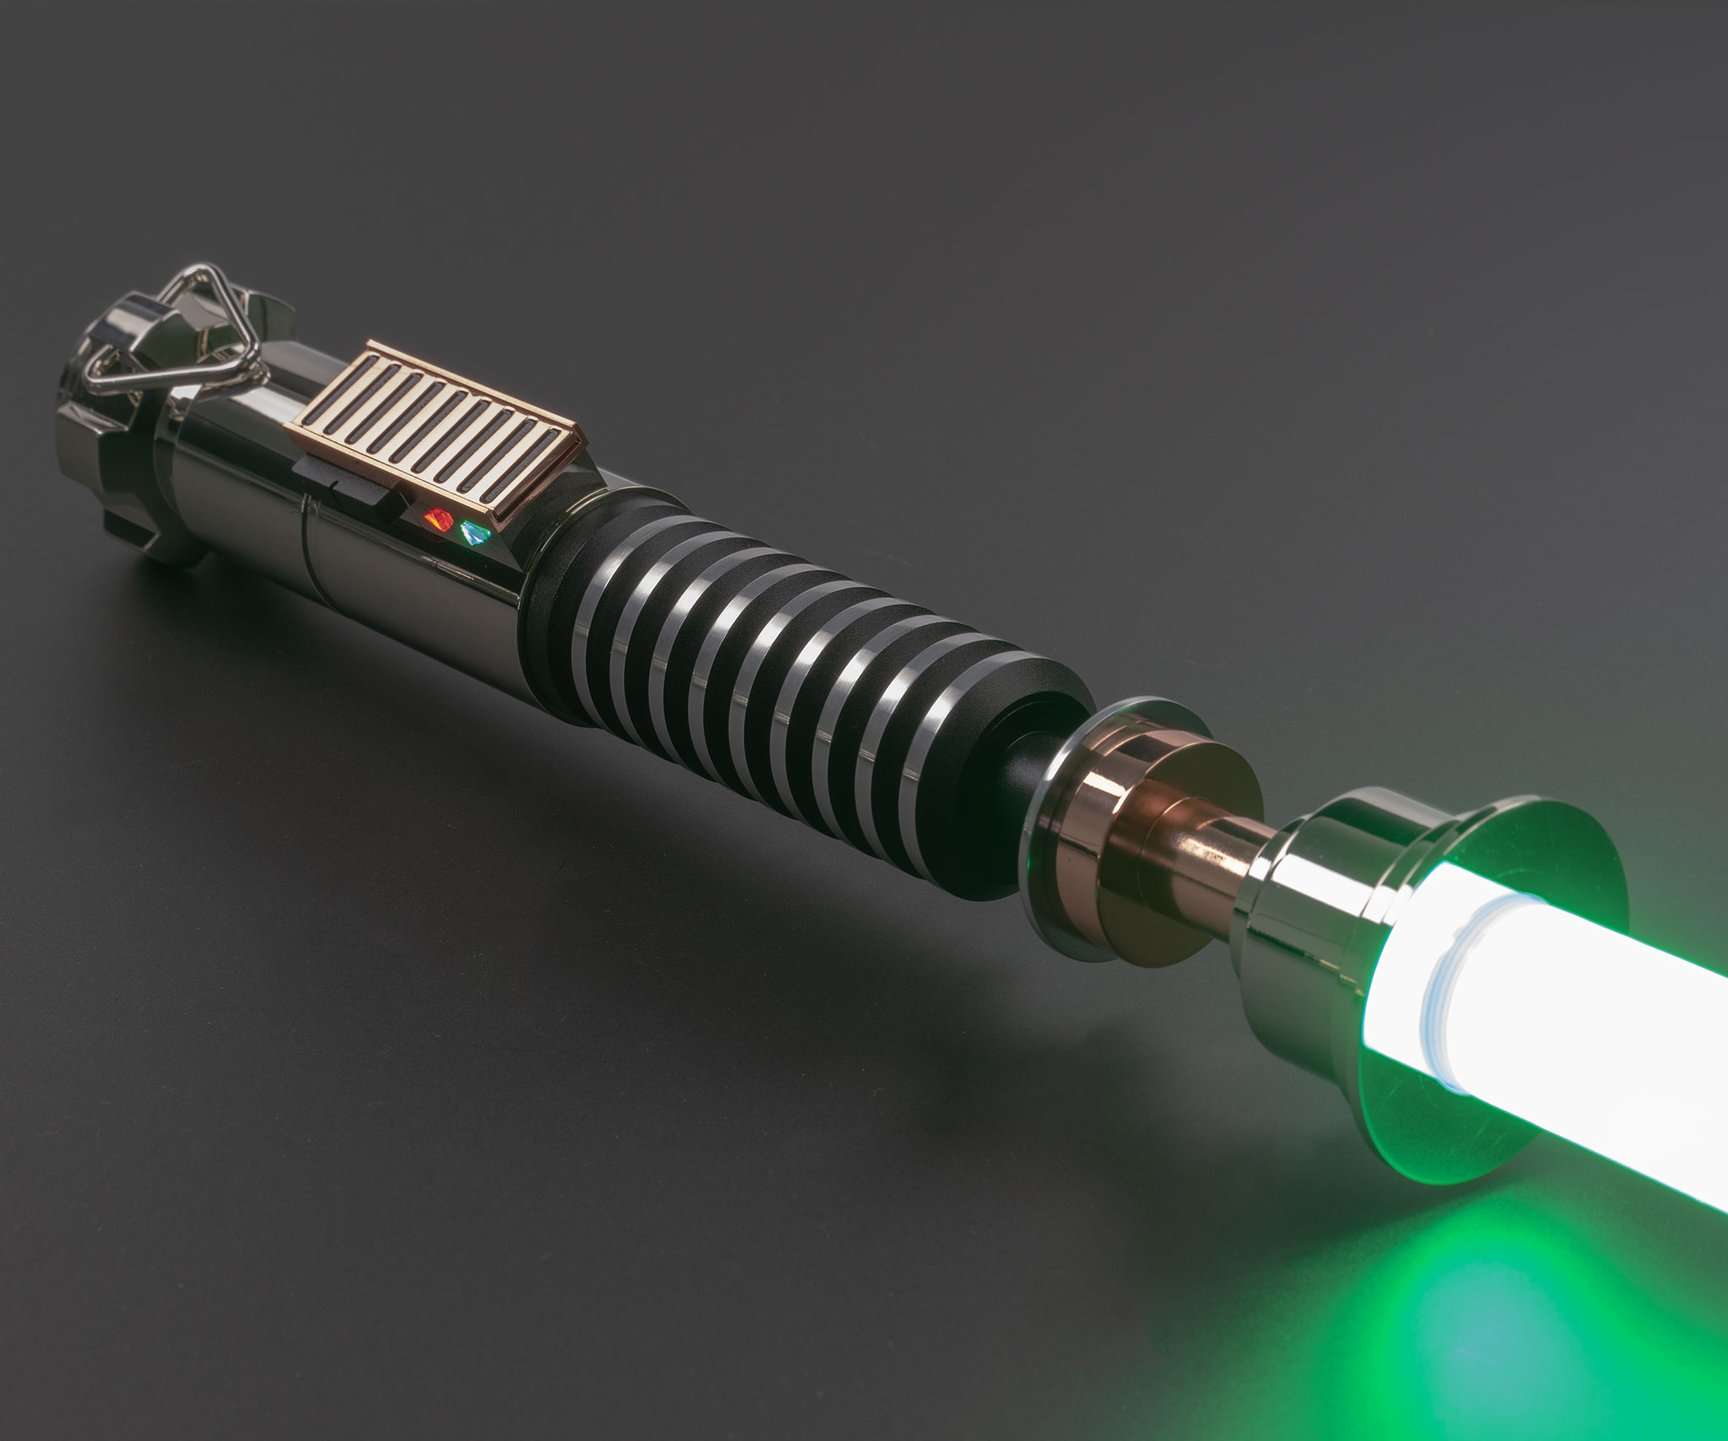 7 Components to Add Reality to Your Lightsaber - Gossip Care